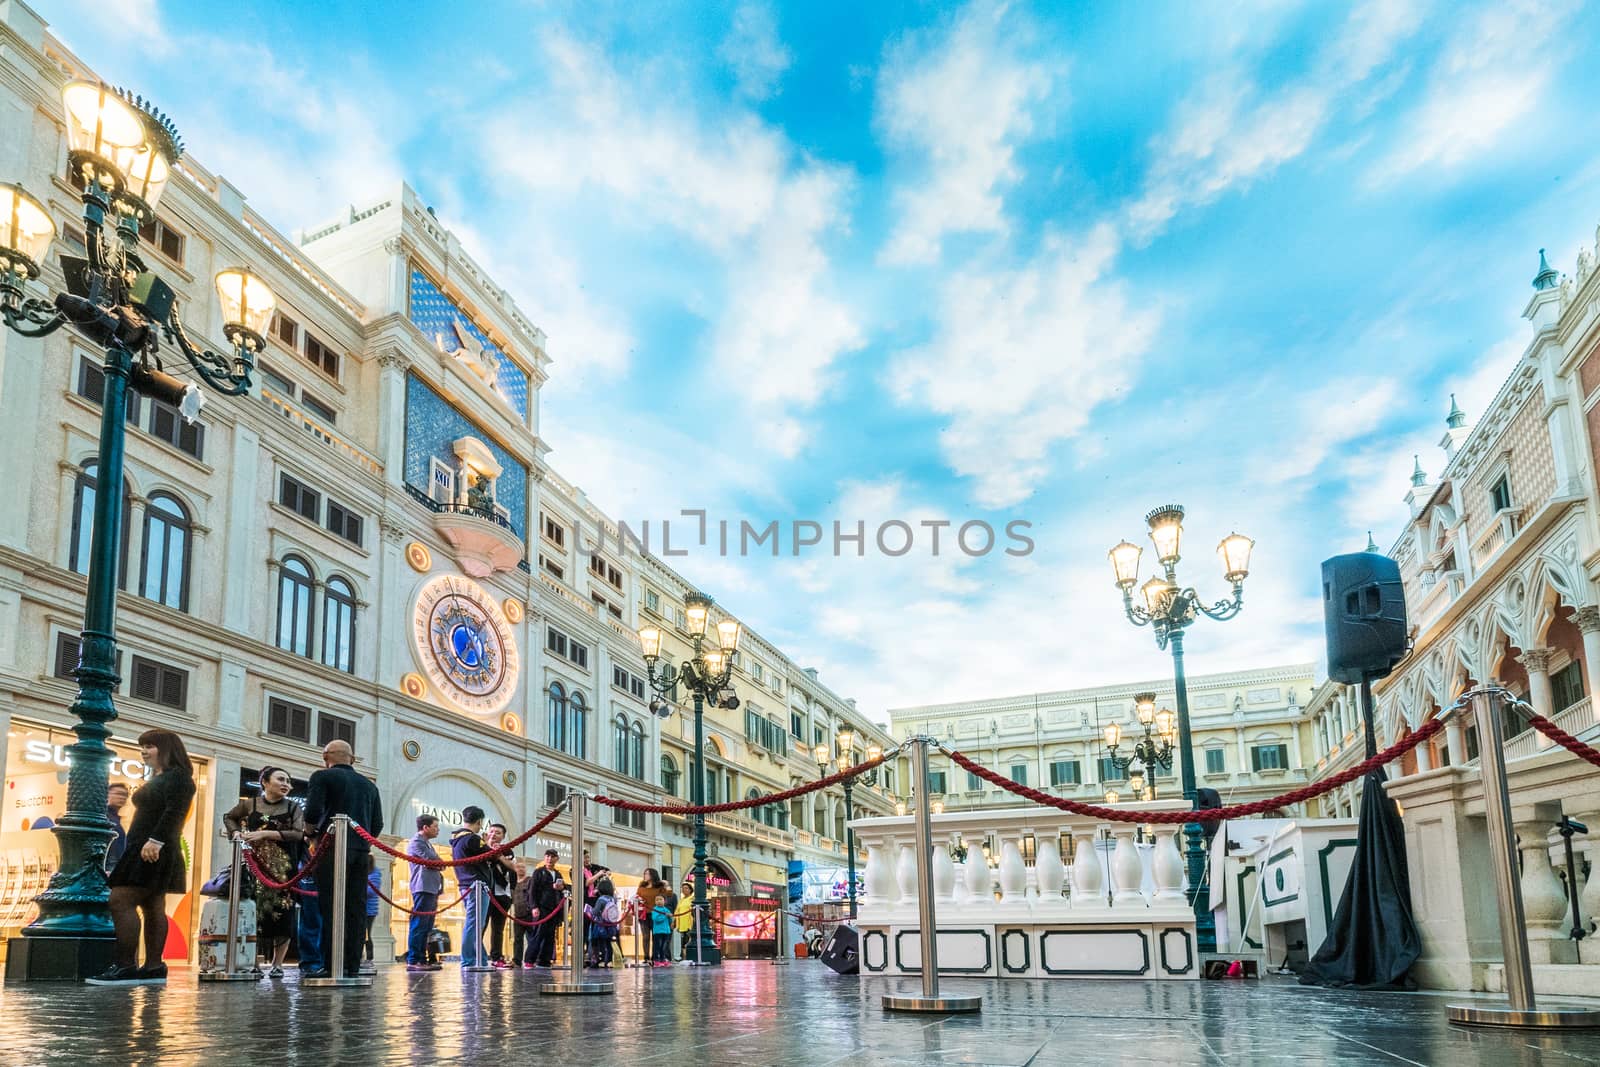 MACAU CHINA-JANUARY 11 visitor on gondola boat in Venetian Hotel The famous shopping mall luxury hotel landmark and the largest casino in the world on January 11,2016 in Macau China
